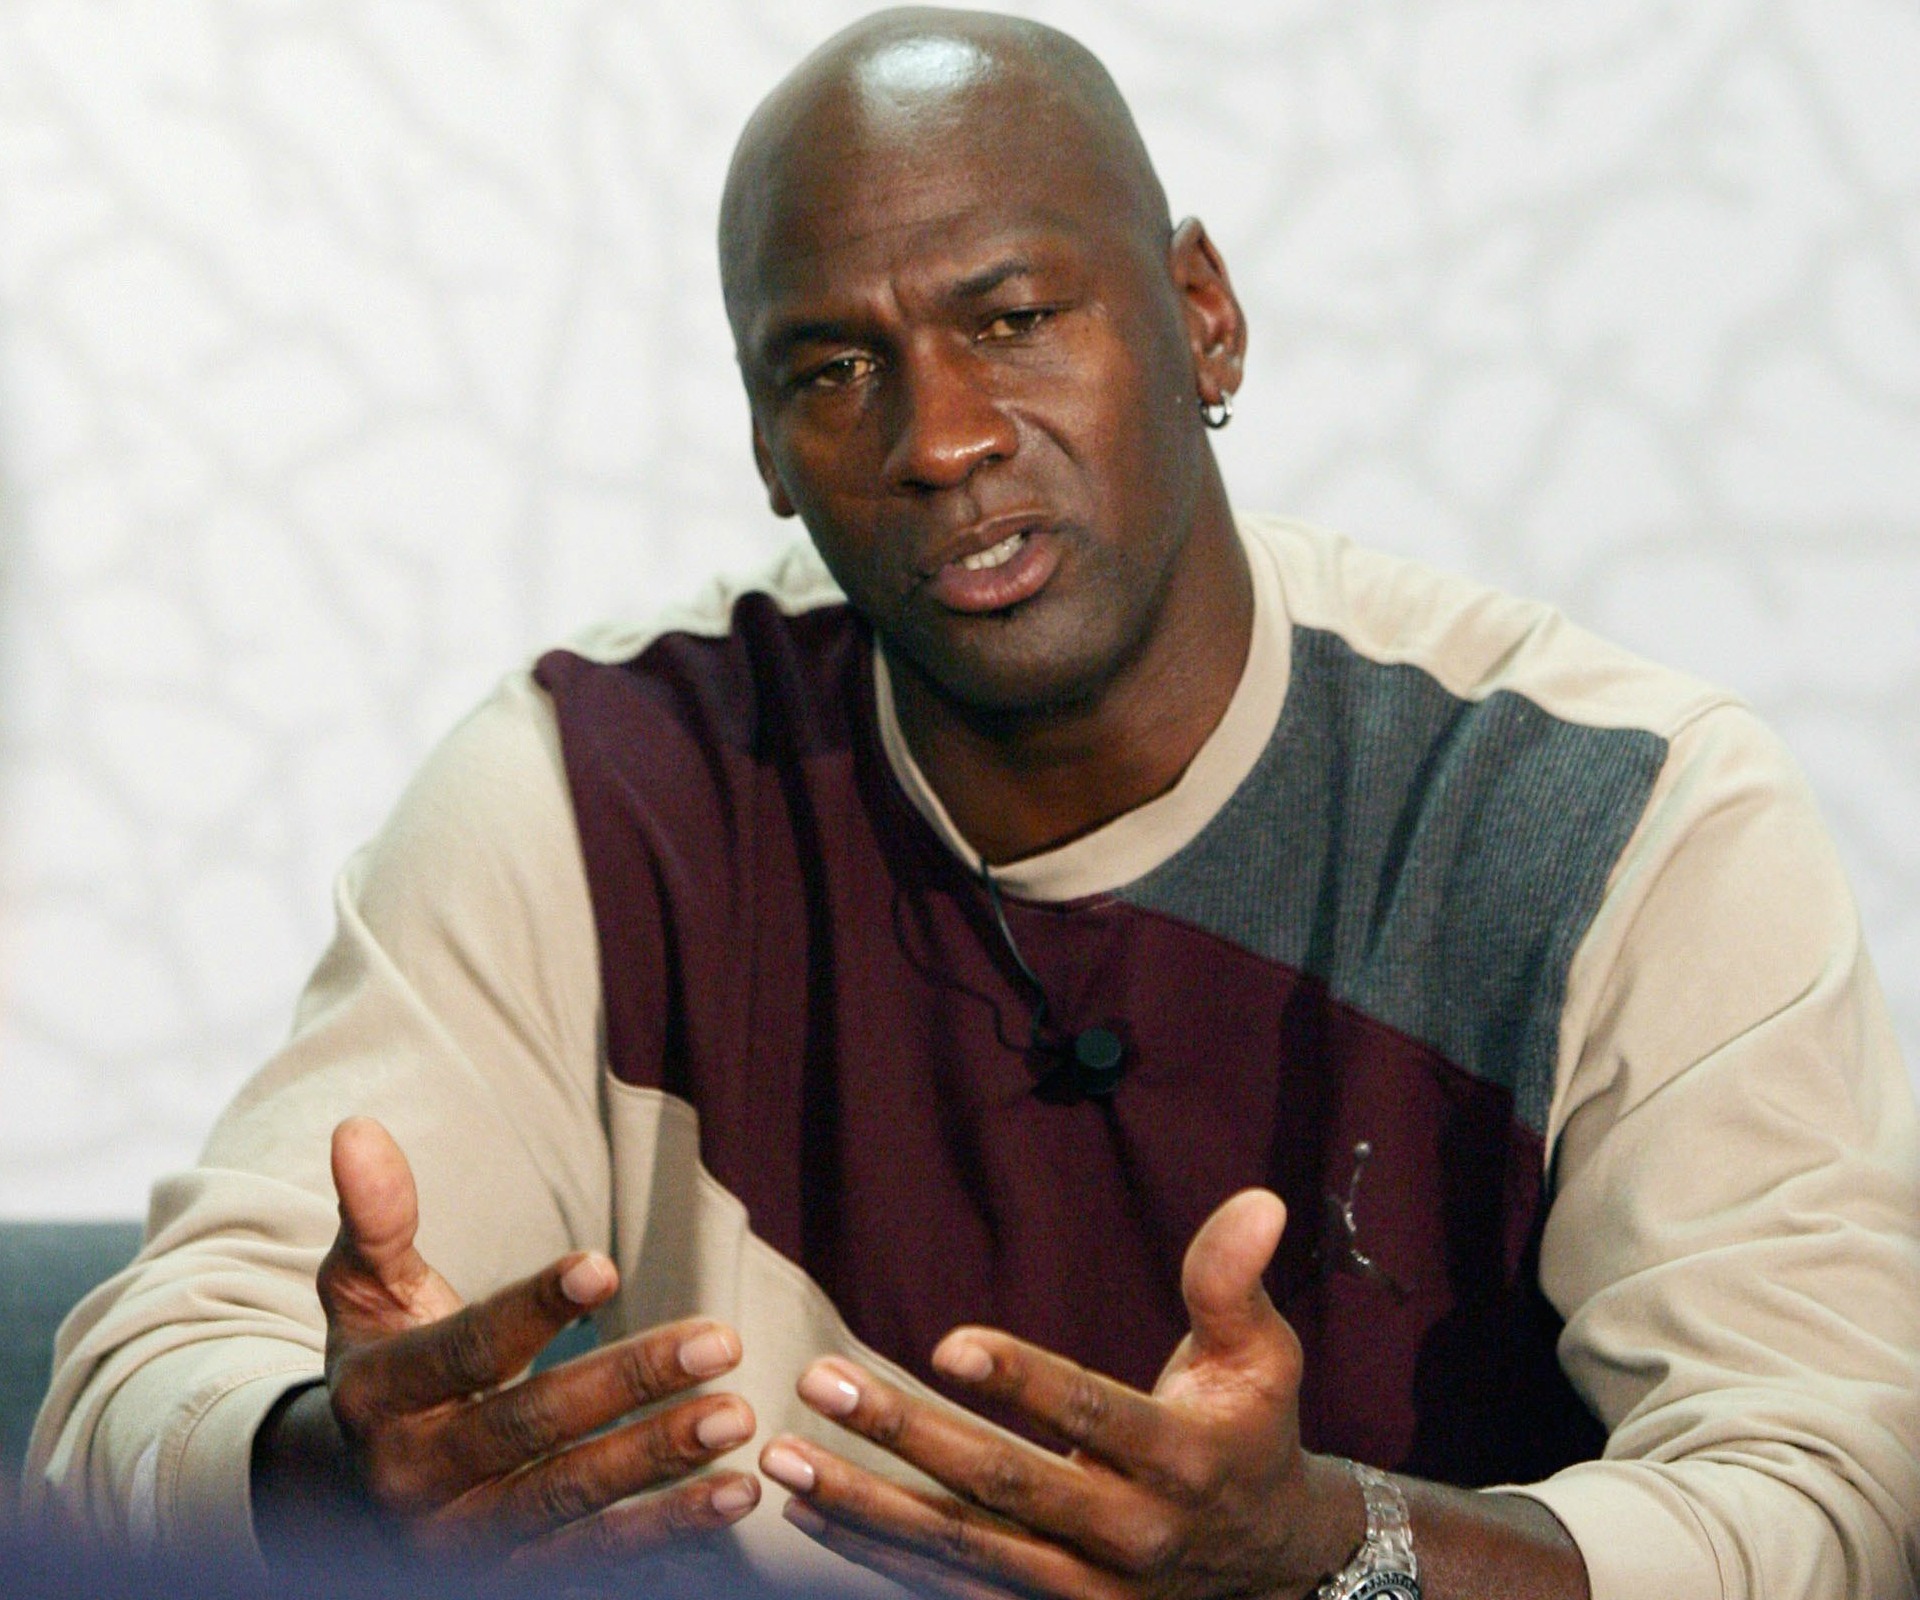 Michael Jordan can ‘no longer stay silent’ on shooting of African Americans